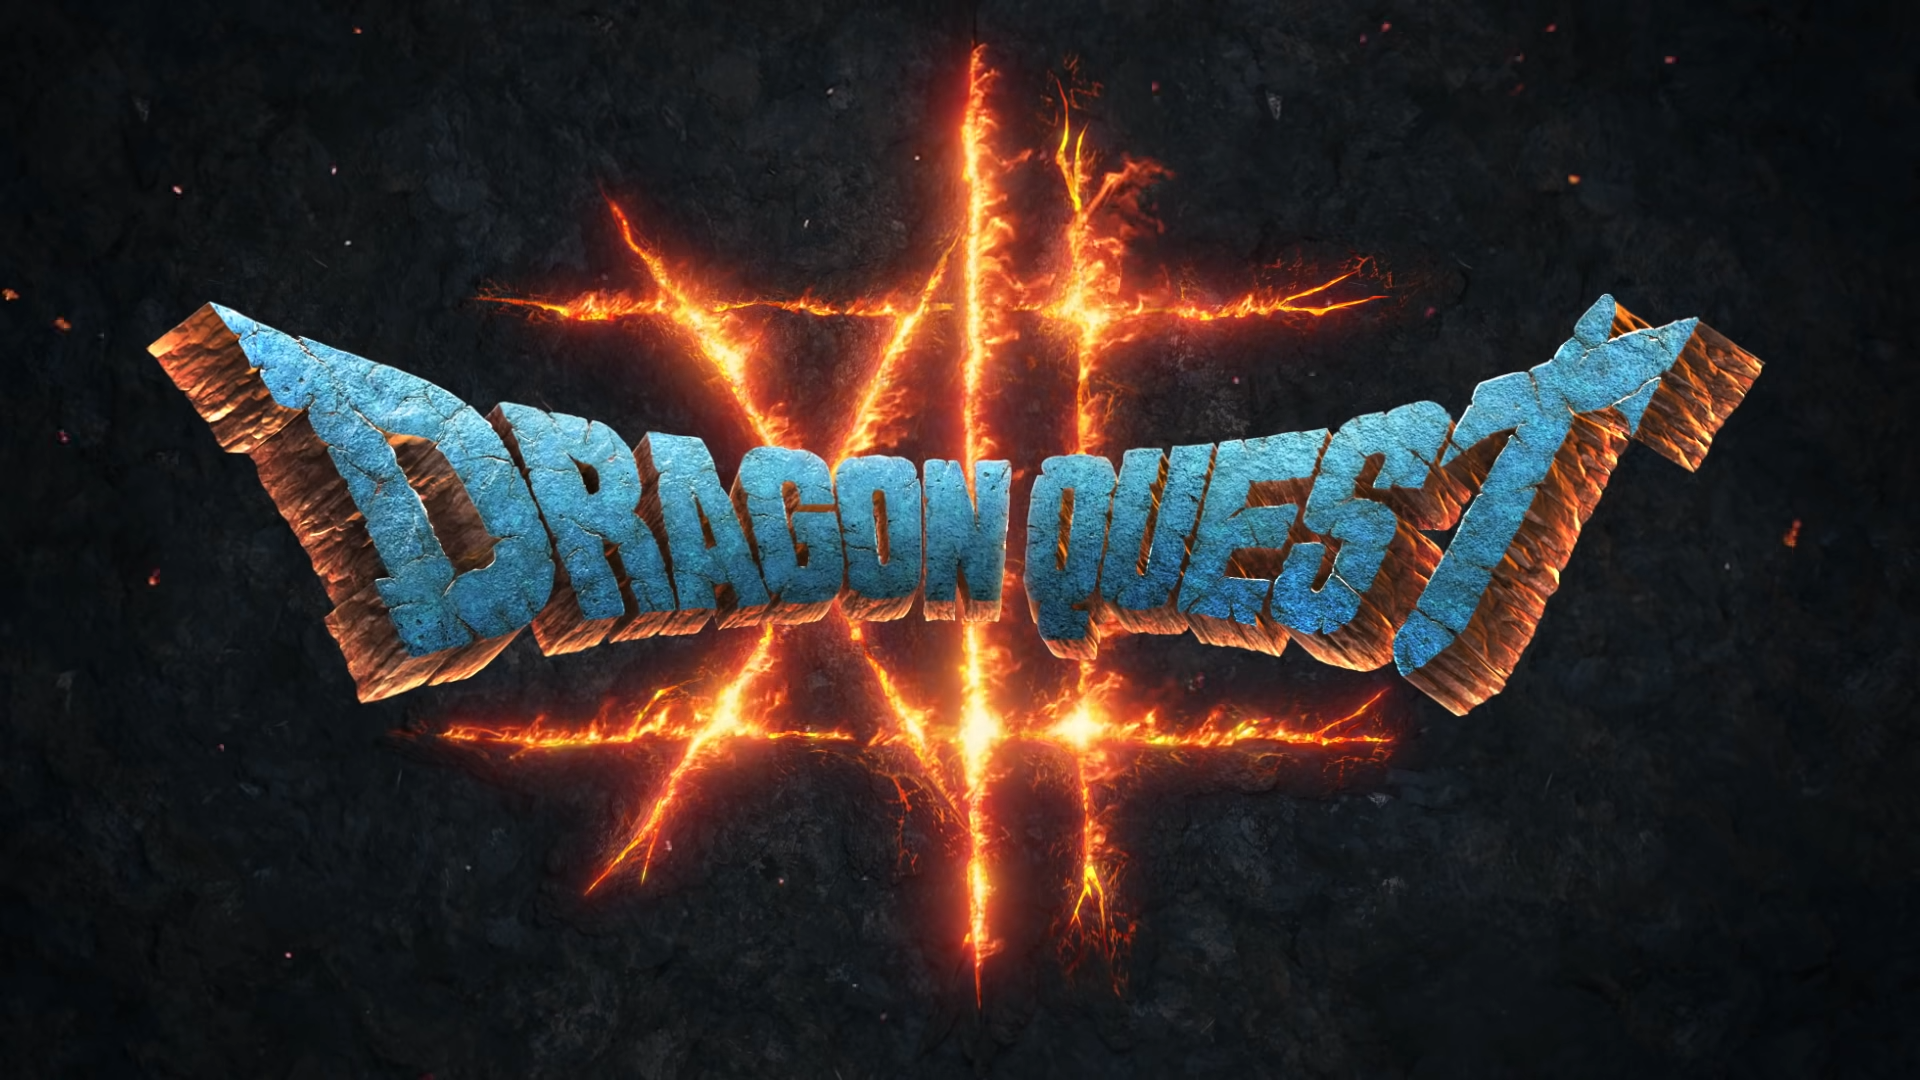 Dragon Quest Champions Announced by Square Enix